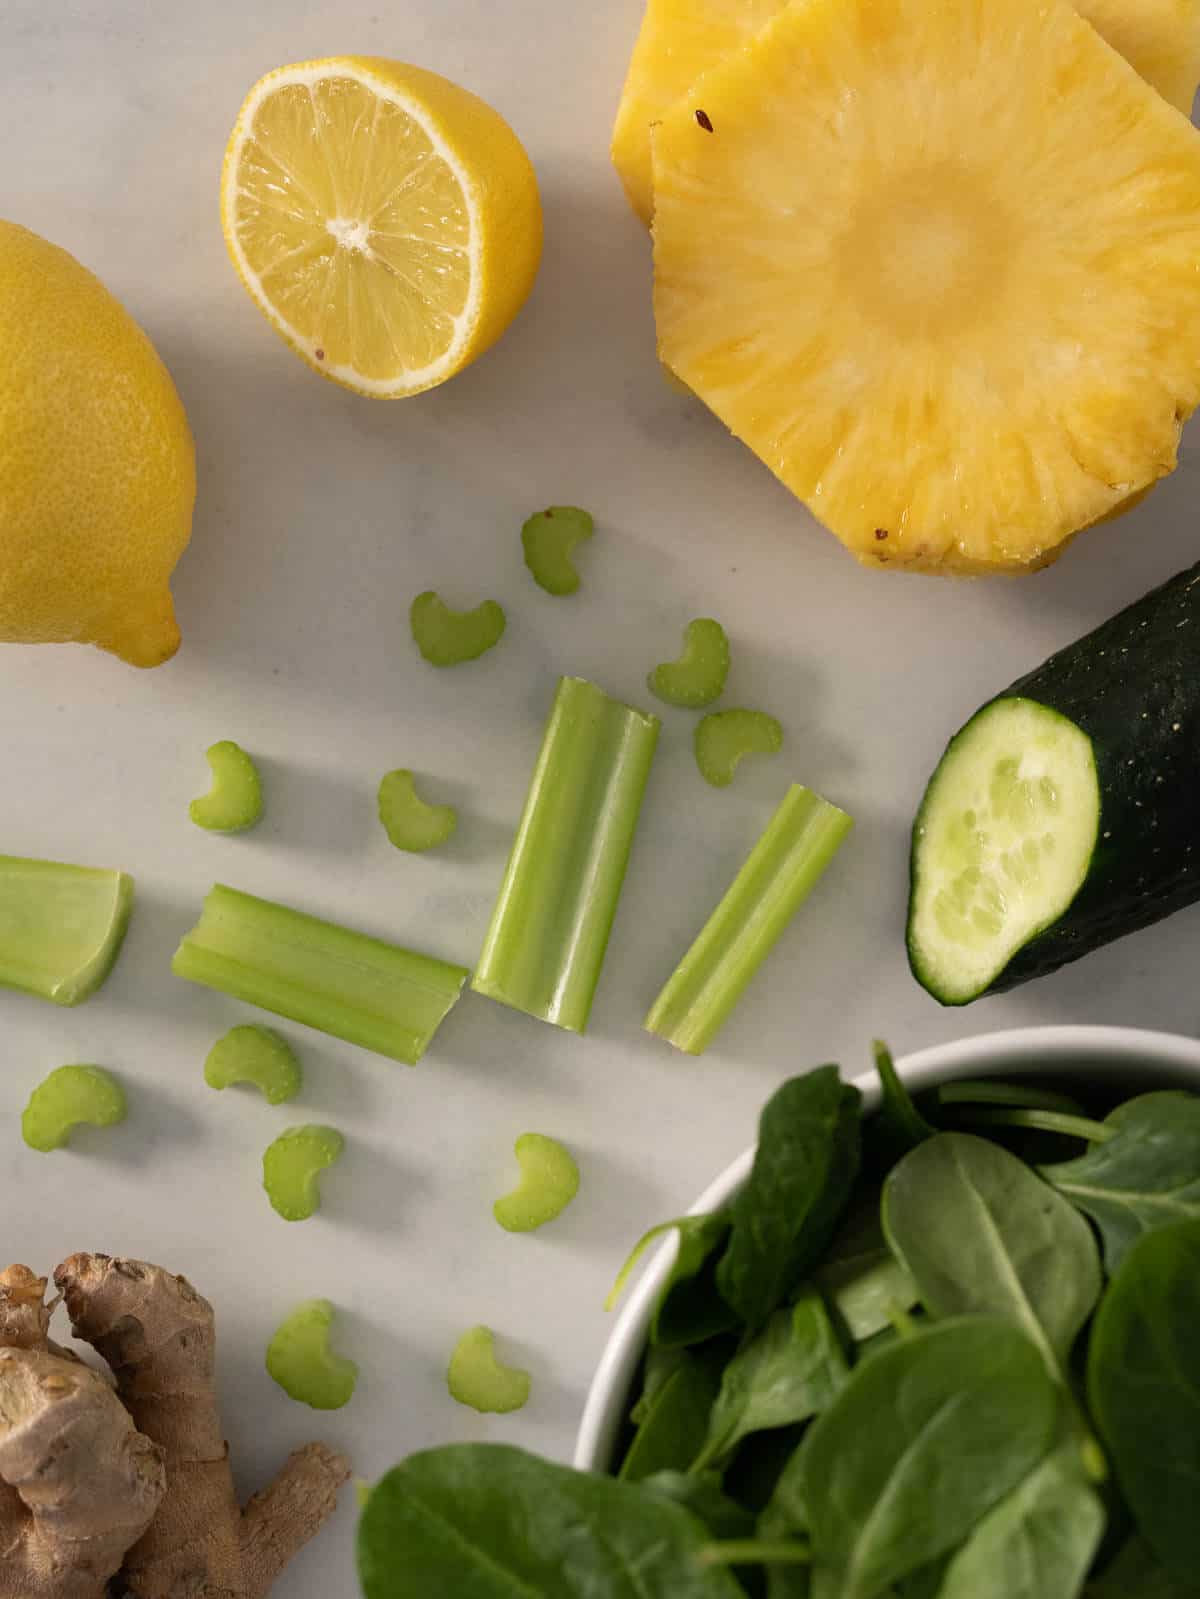 ingredients to make pineapple ginger juice with spinach and cucumber.